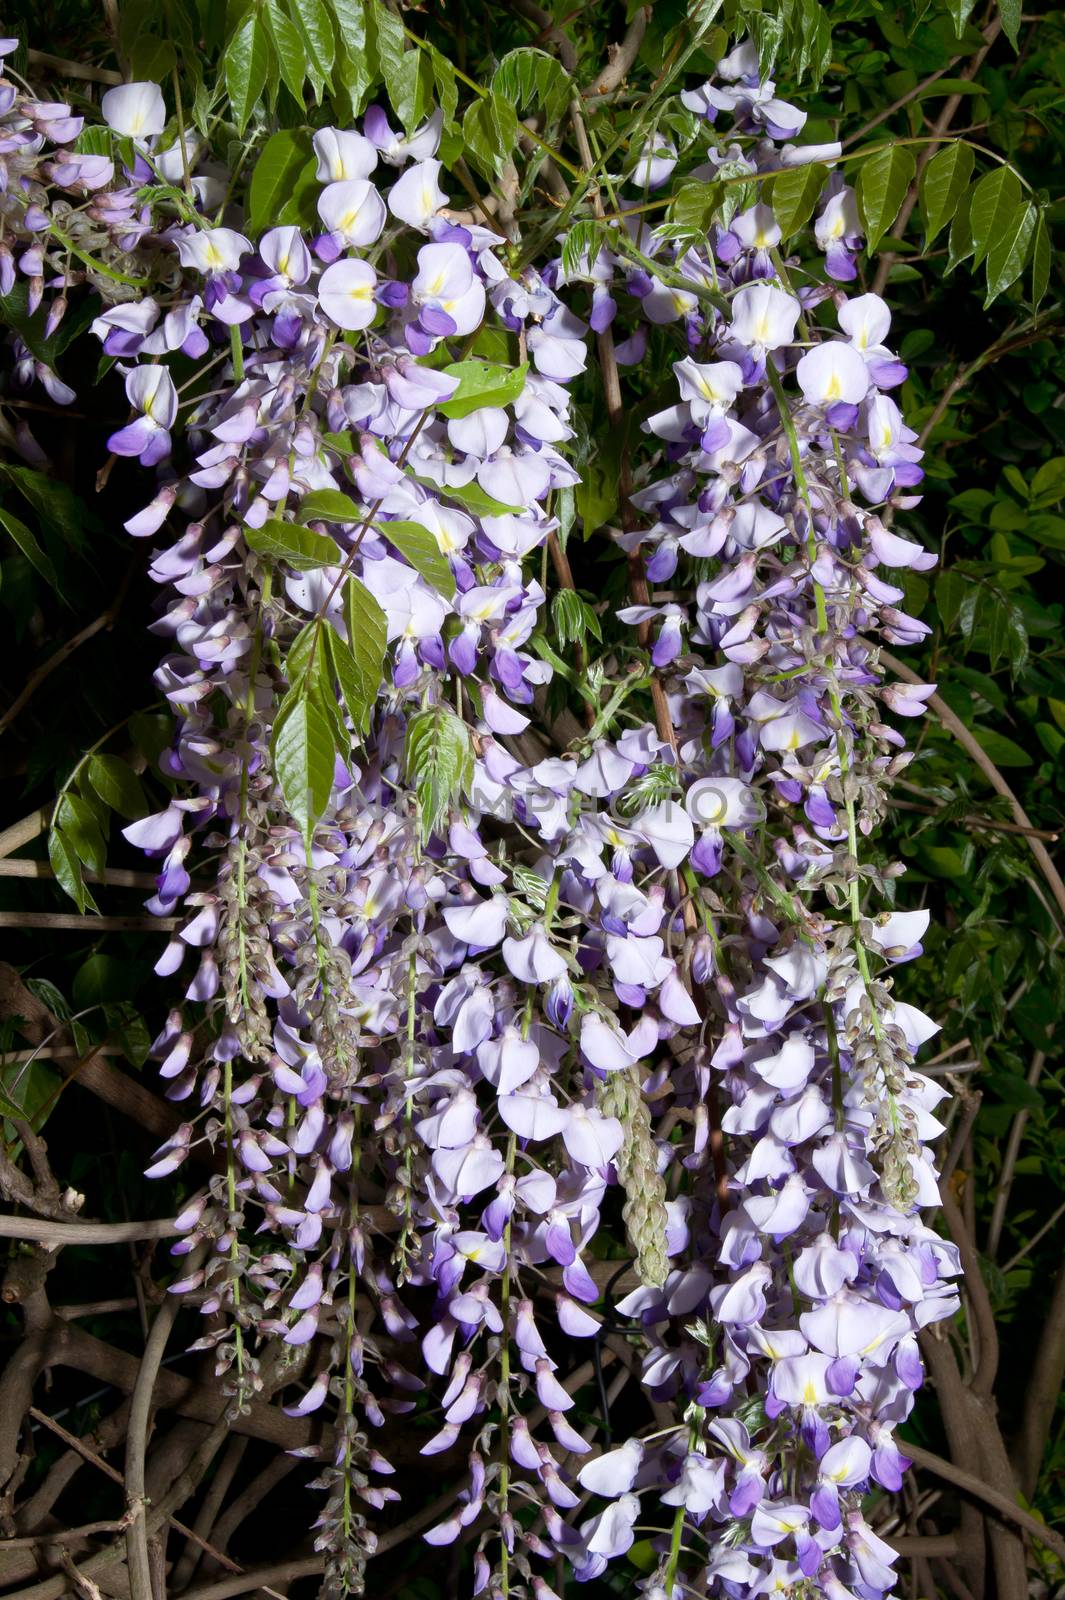 The wisteria flower of spring lilac in color.